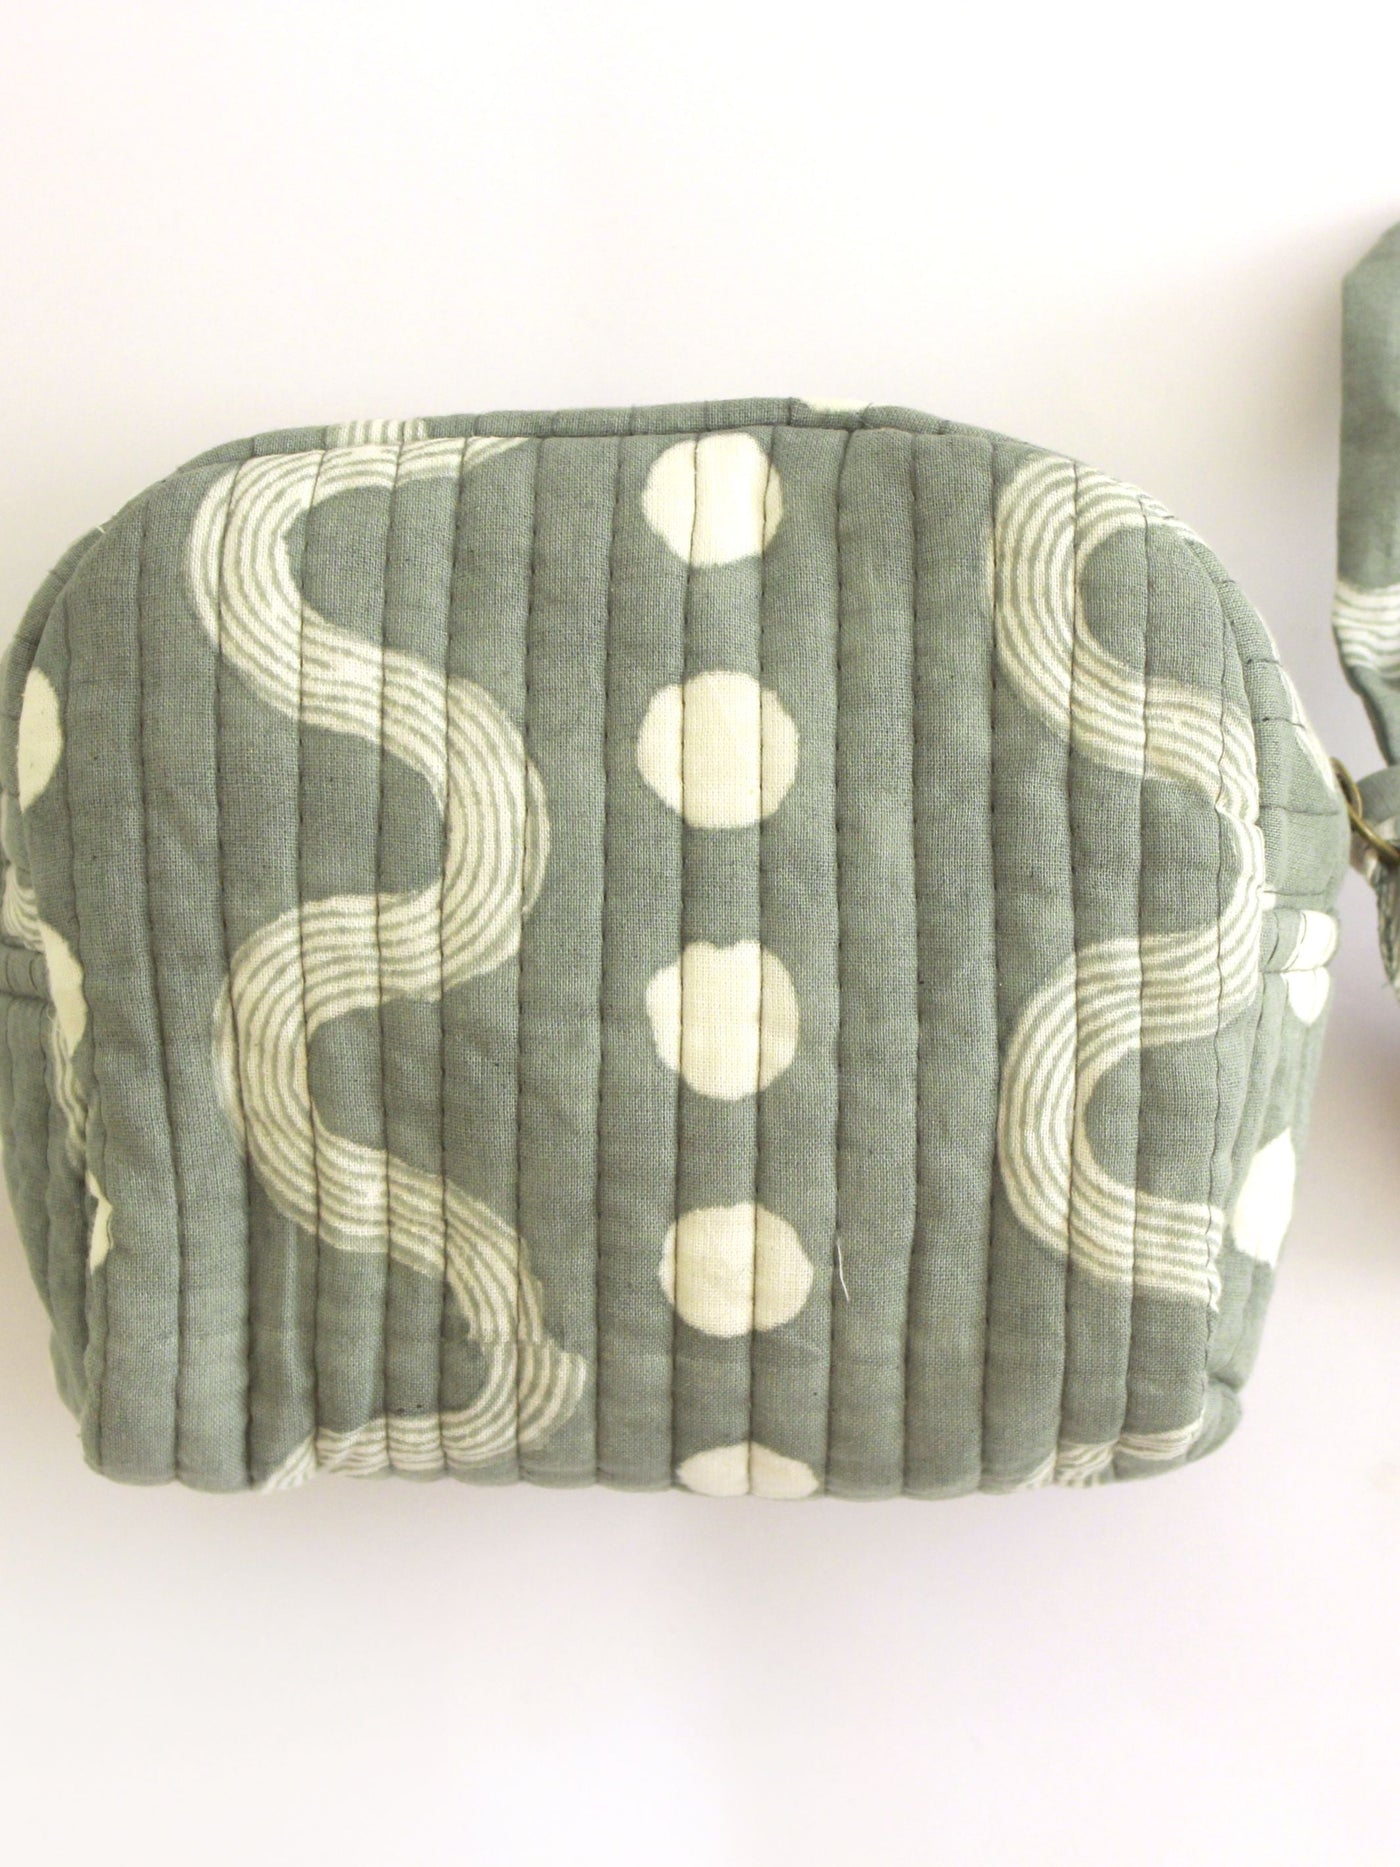 Cotton Travel Organizer Kit - Sustainable Quilted Set of 3